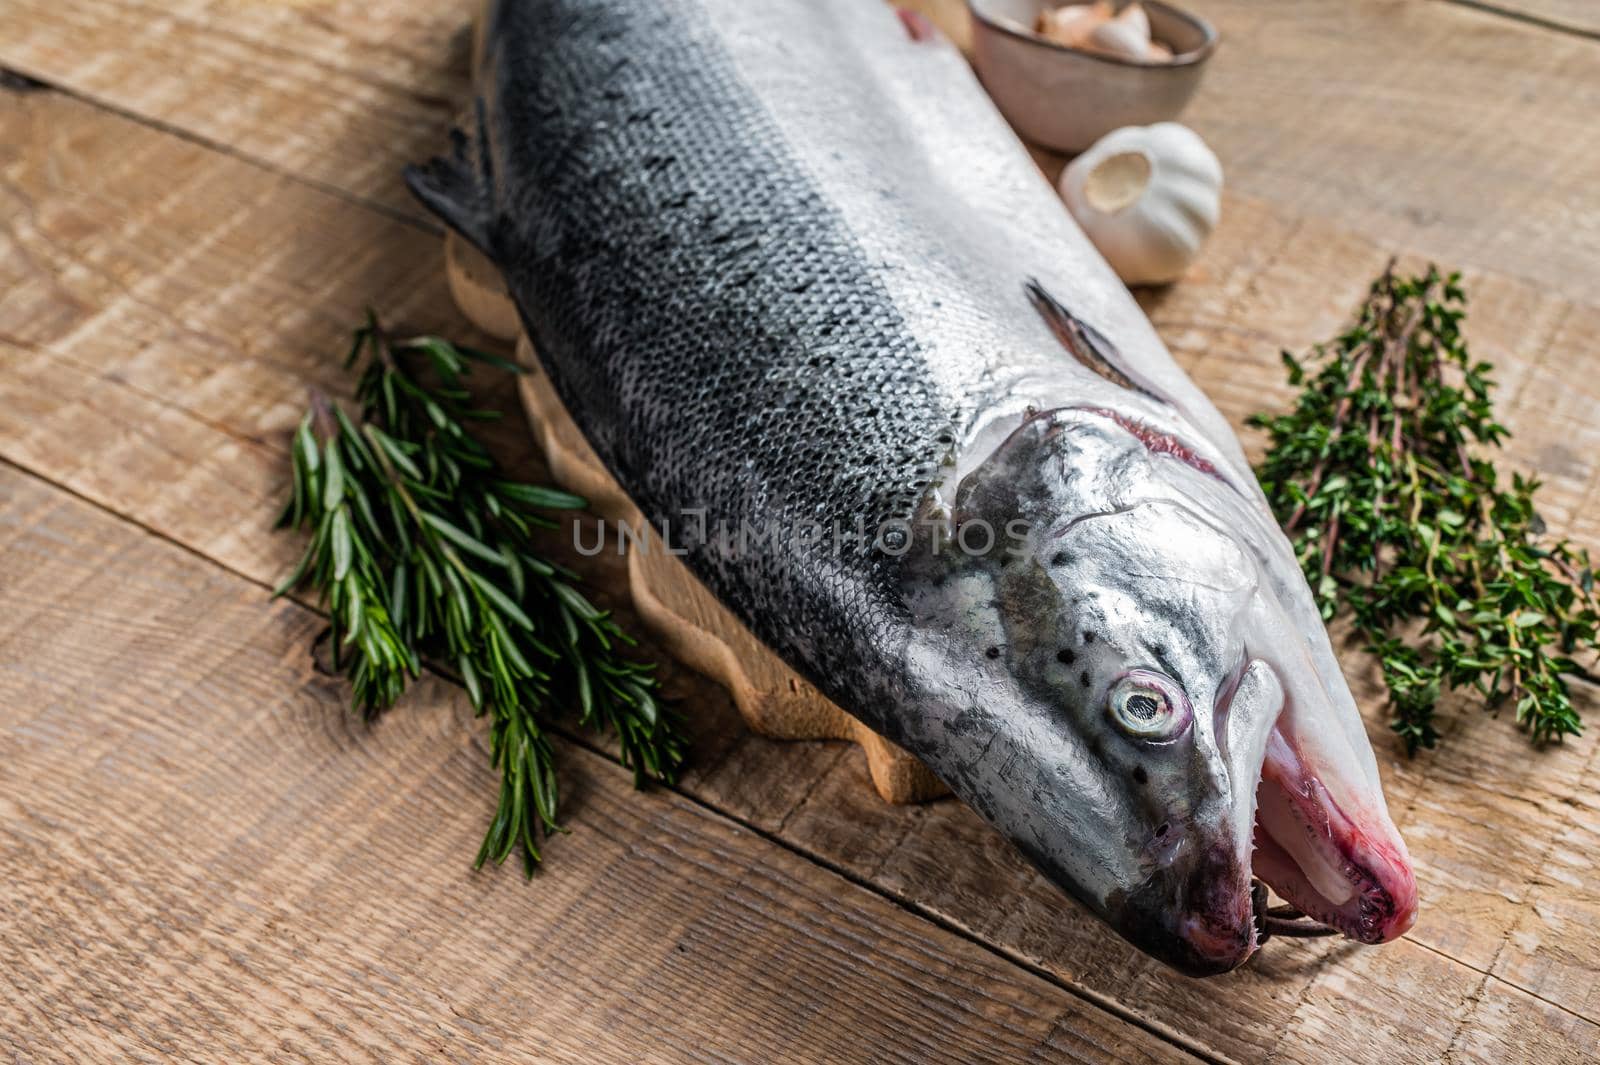 Raw marine salmon fish on a wooden kichen table with herbs. Wooden background. Top view by Composter